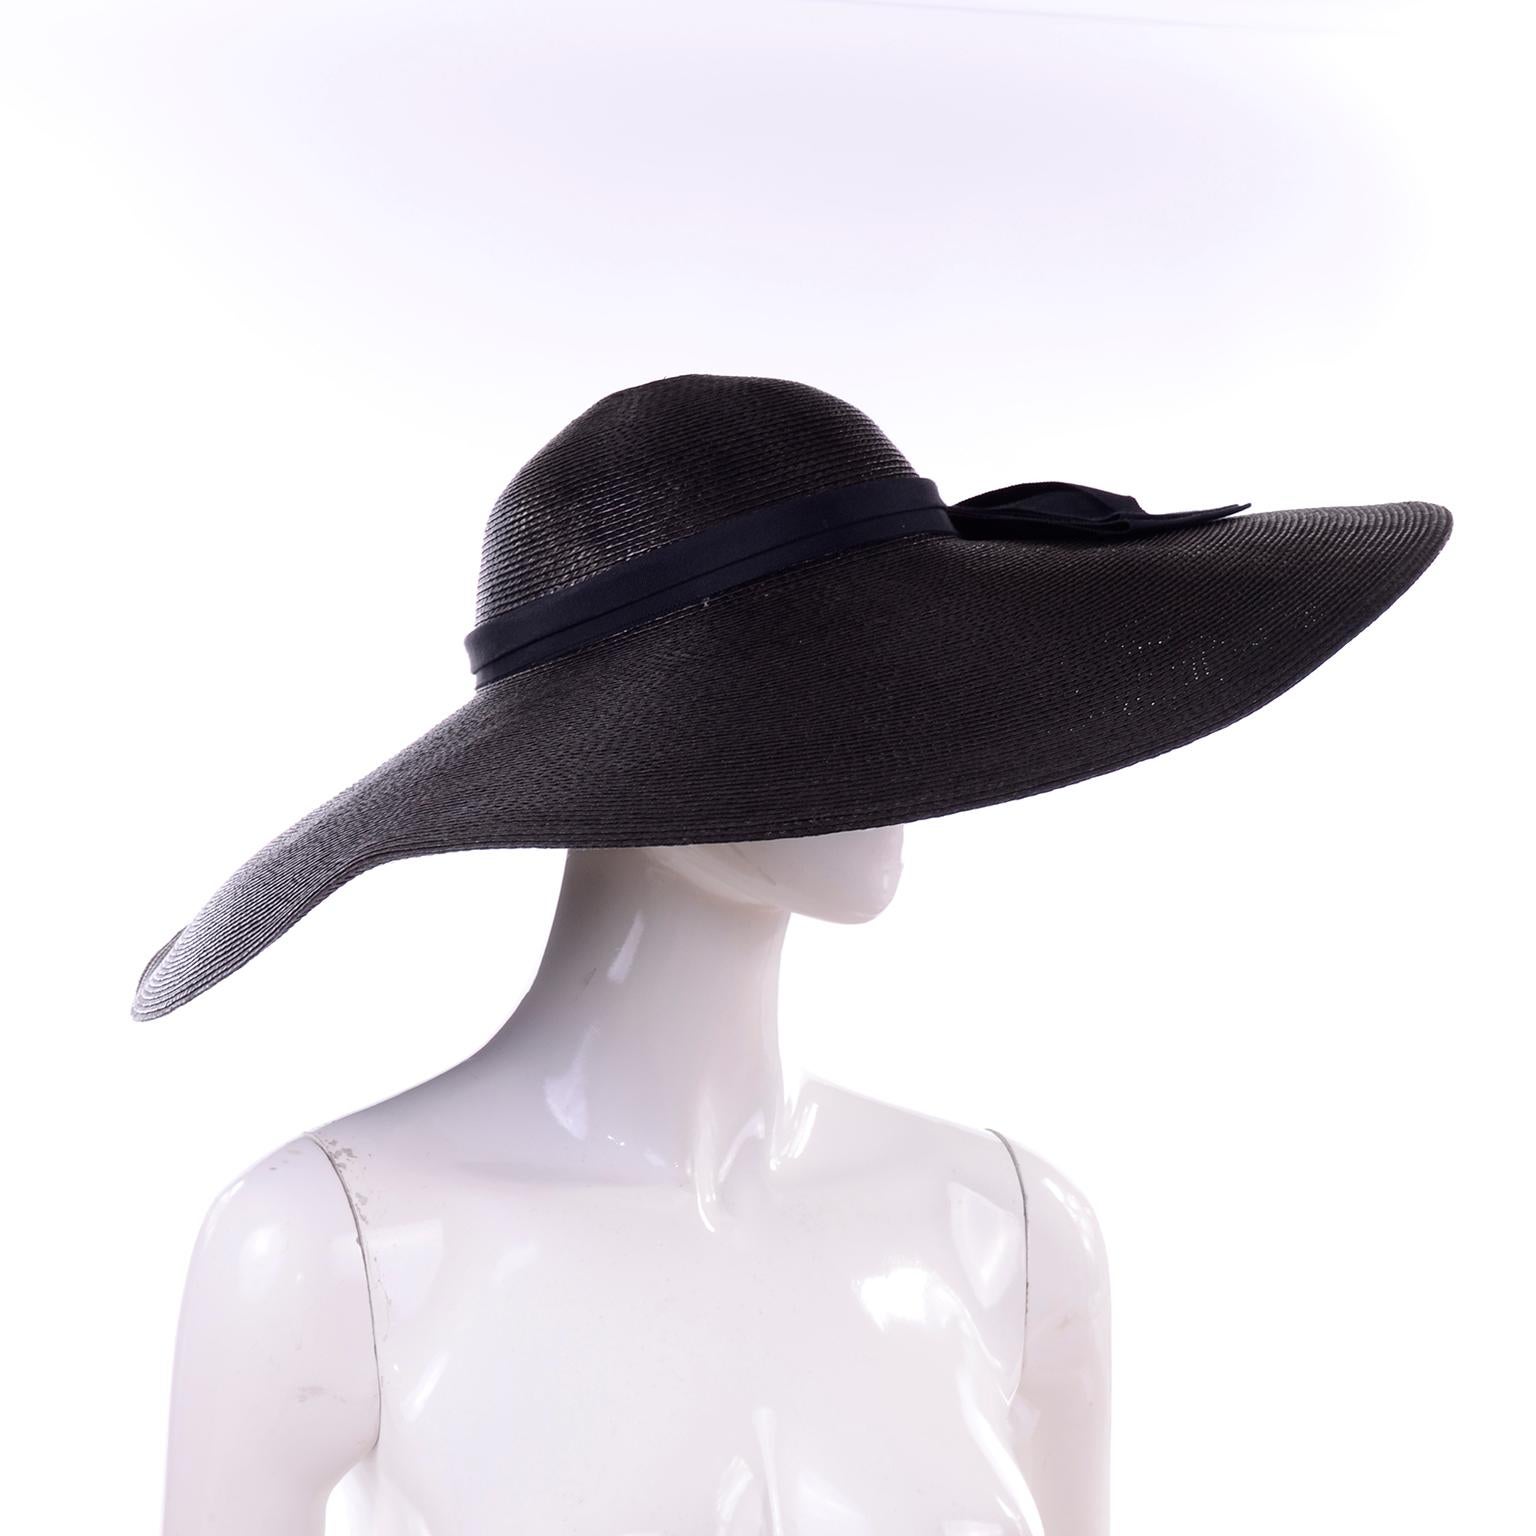 This is a fabulous Linda Eastwood extra wide brim black straw sun hat with a large black bow on the back. This has the LInda Eastwood label and another one that reads; 707. The perfect summer hat with so much style!  Head Circumference: 22